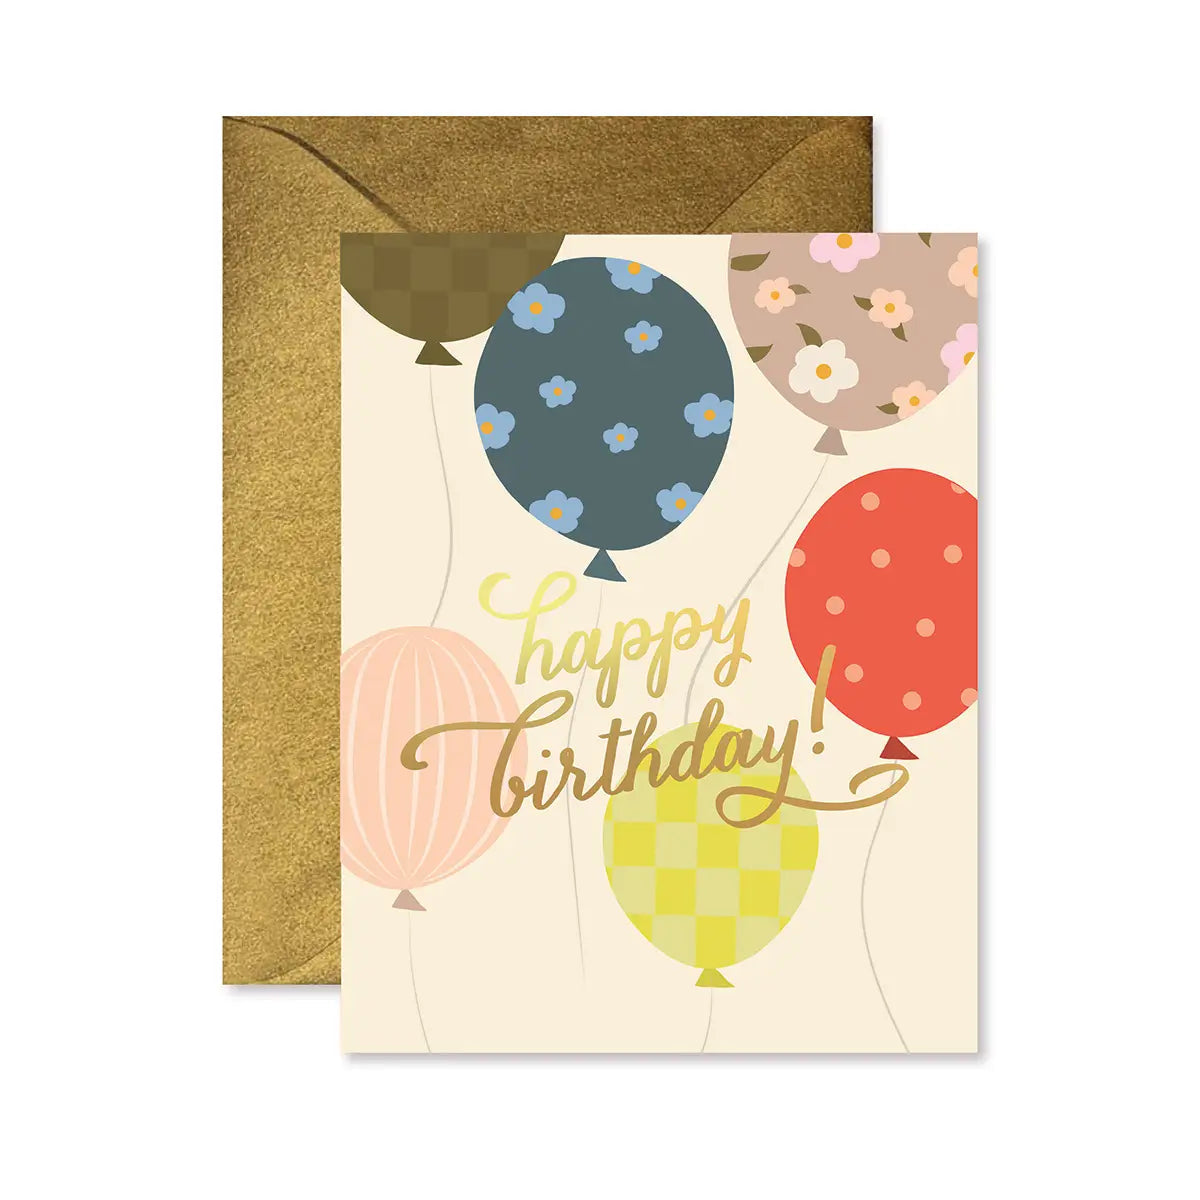 Balloon Release Birthday Card 193 GIFT PARENT Ginger P. Designs 